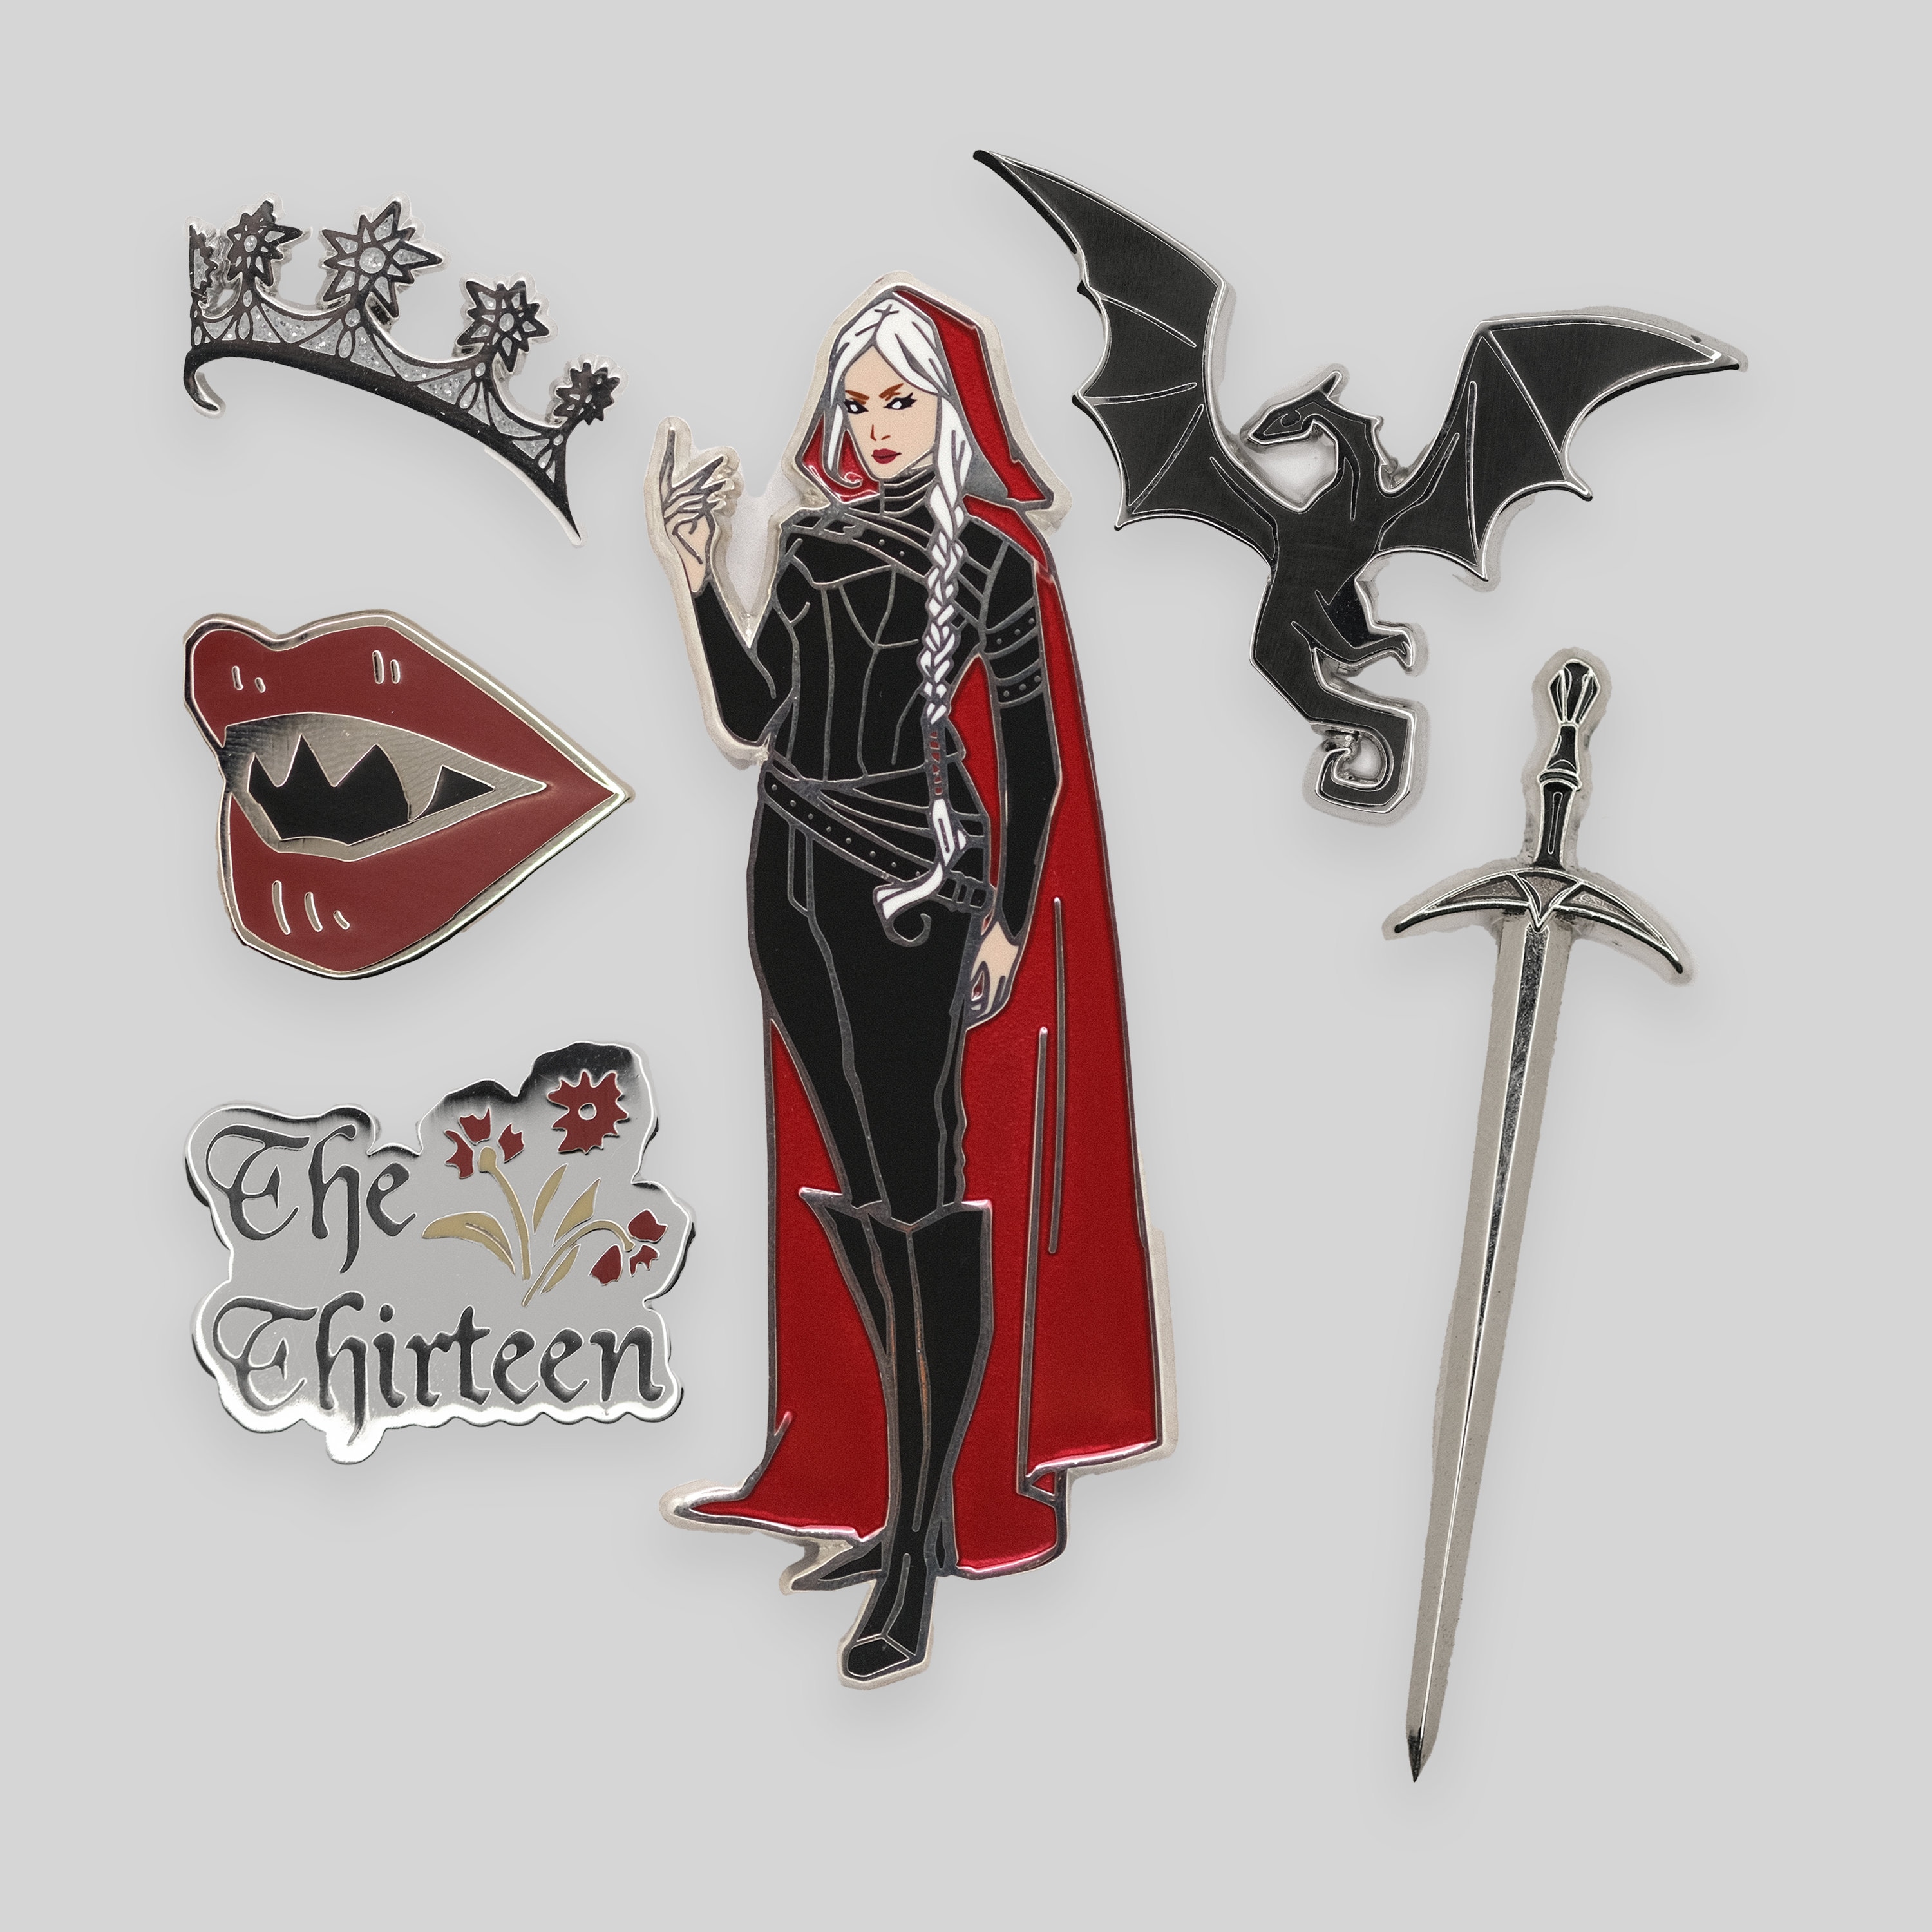 Manon Throne of Glass Collection Enamel Pin - Etsy